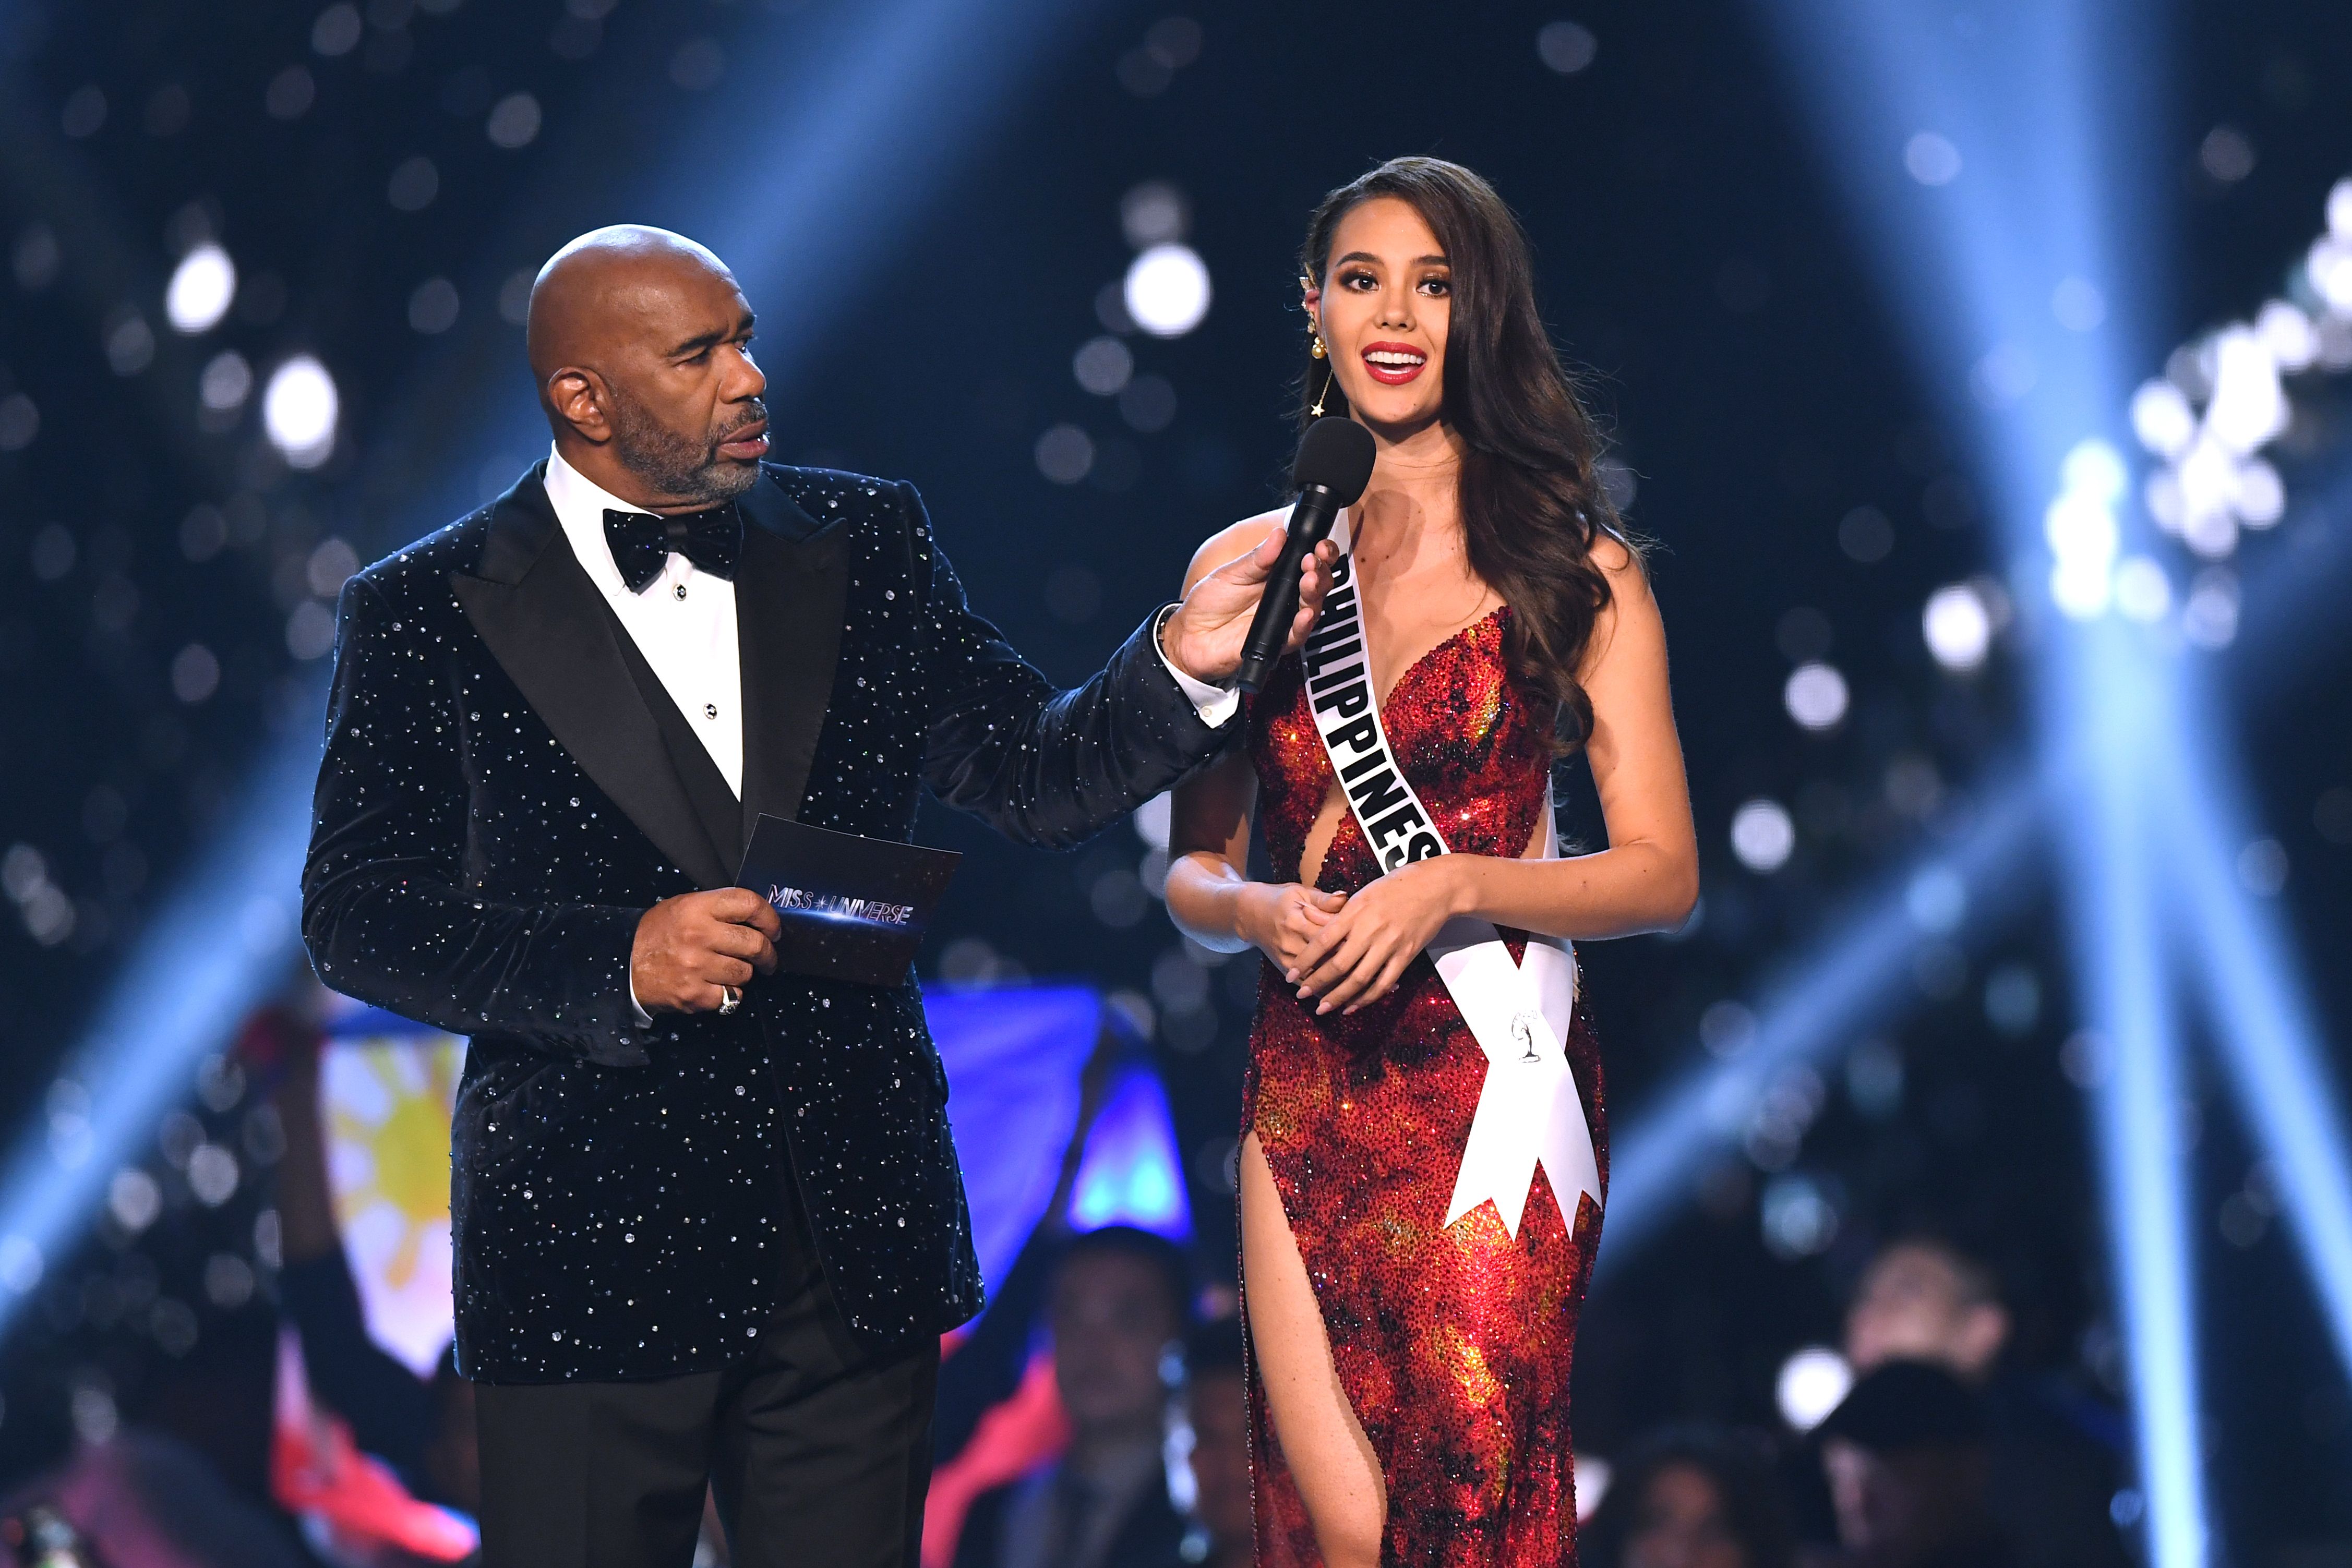 Who Is Miss Philippines? Here's 8 Things About The Miss Universe Winner